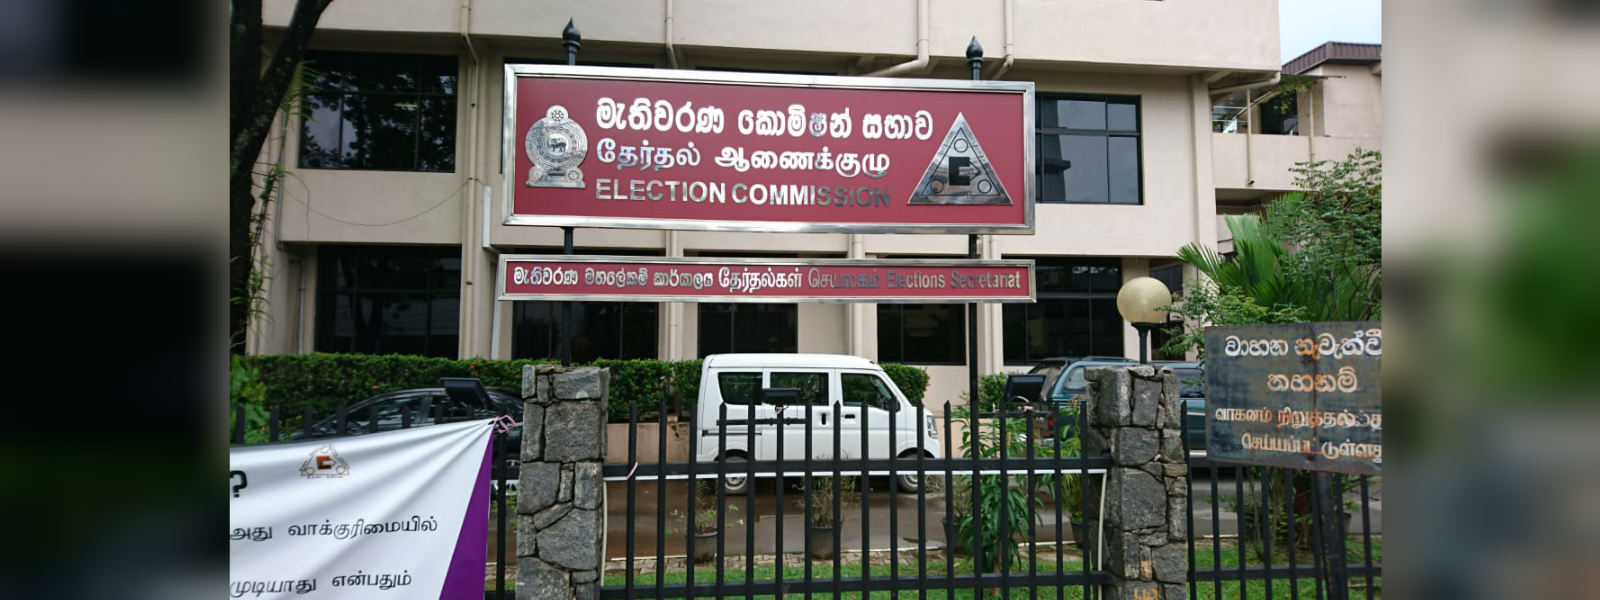 Utilizing state property to promote or defame candidates prohibited – Elections Commission